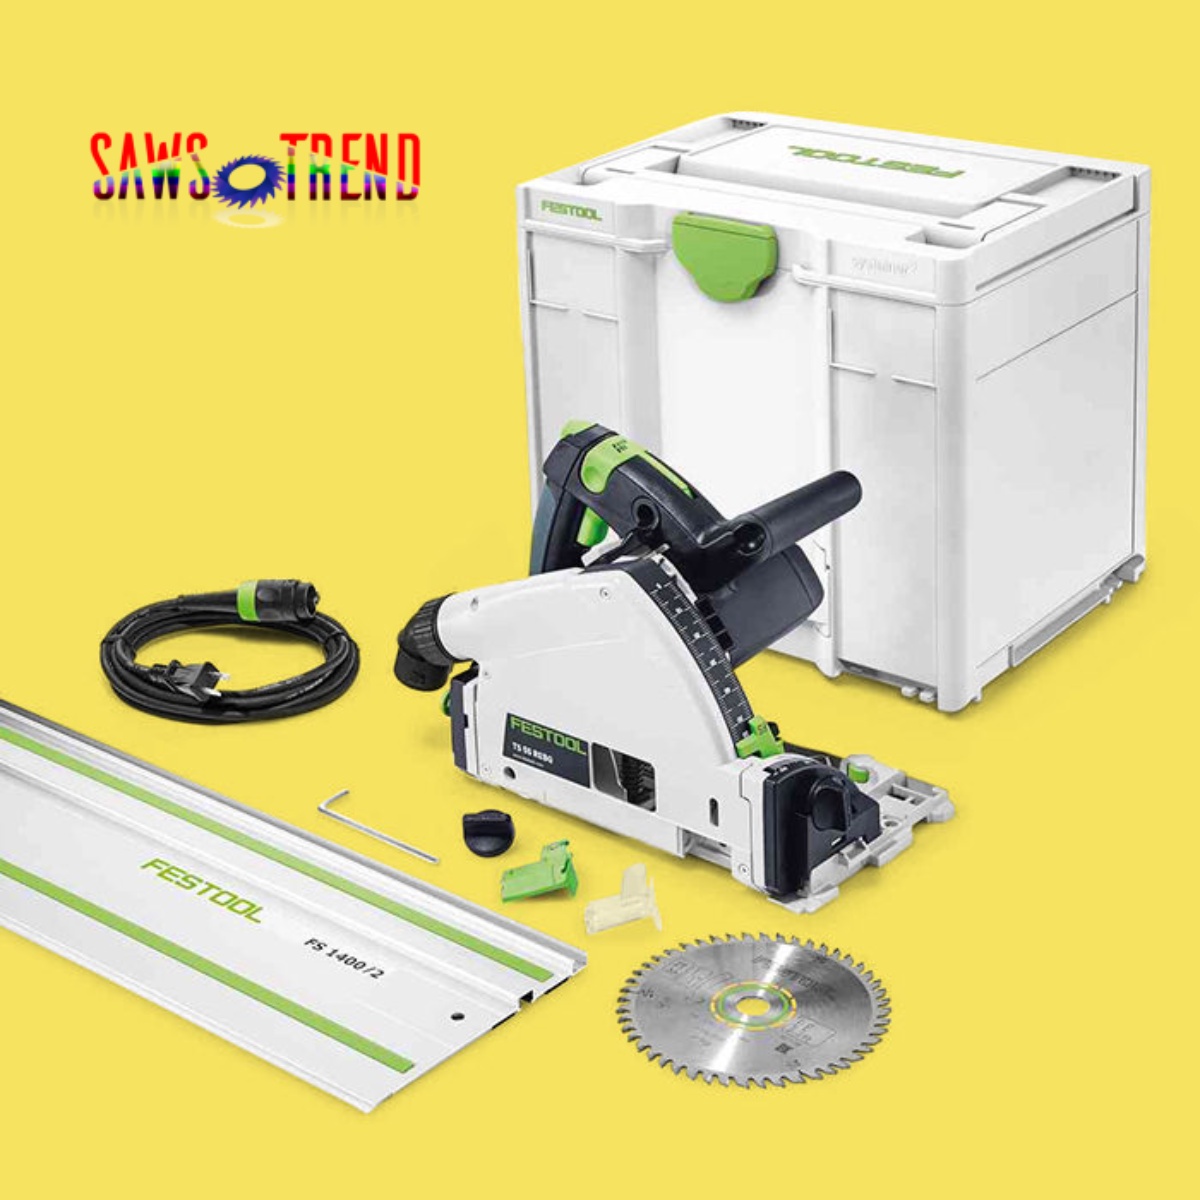 Top 5 Track Saws for Fine Woodworking: A Comprehensive Review